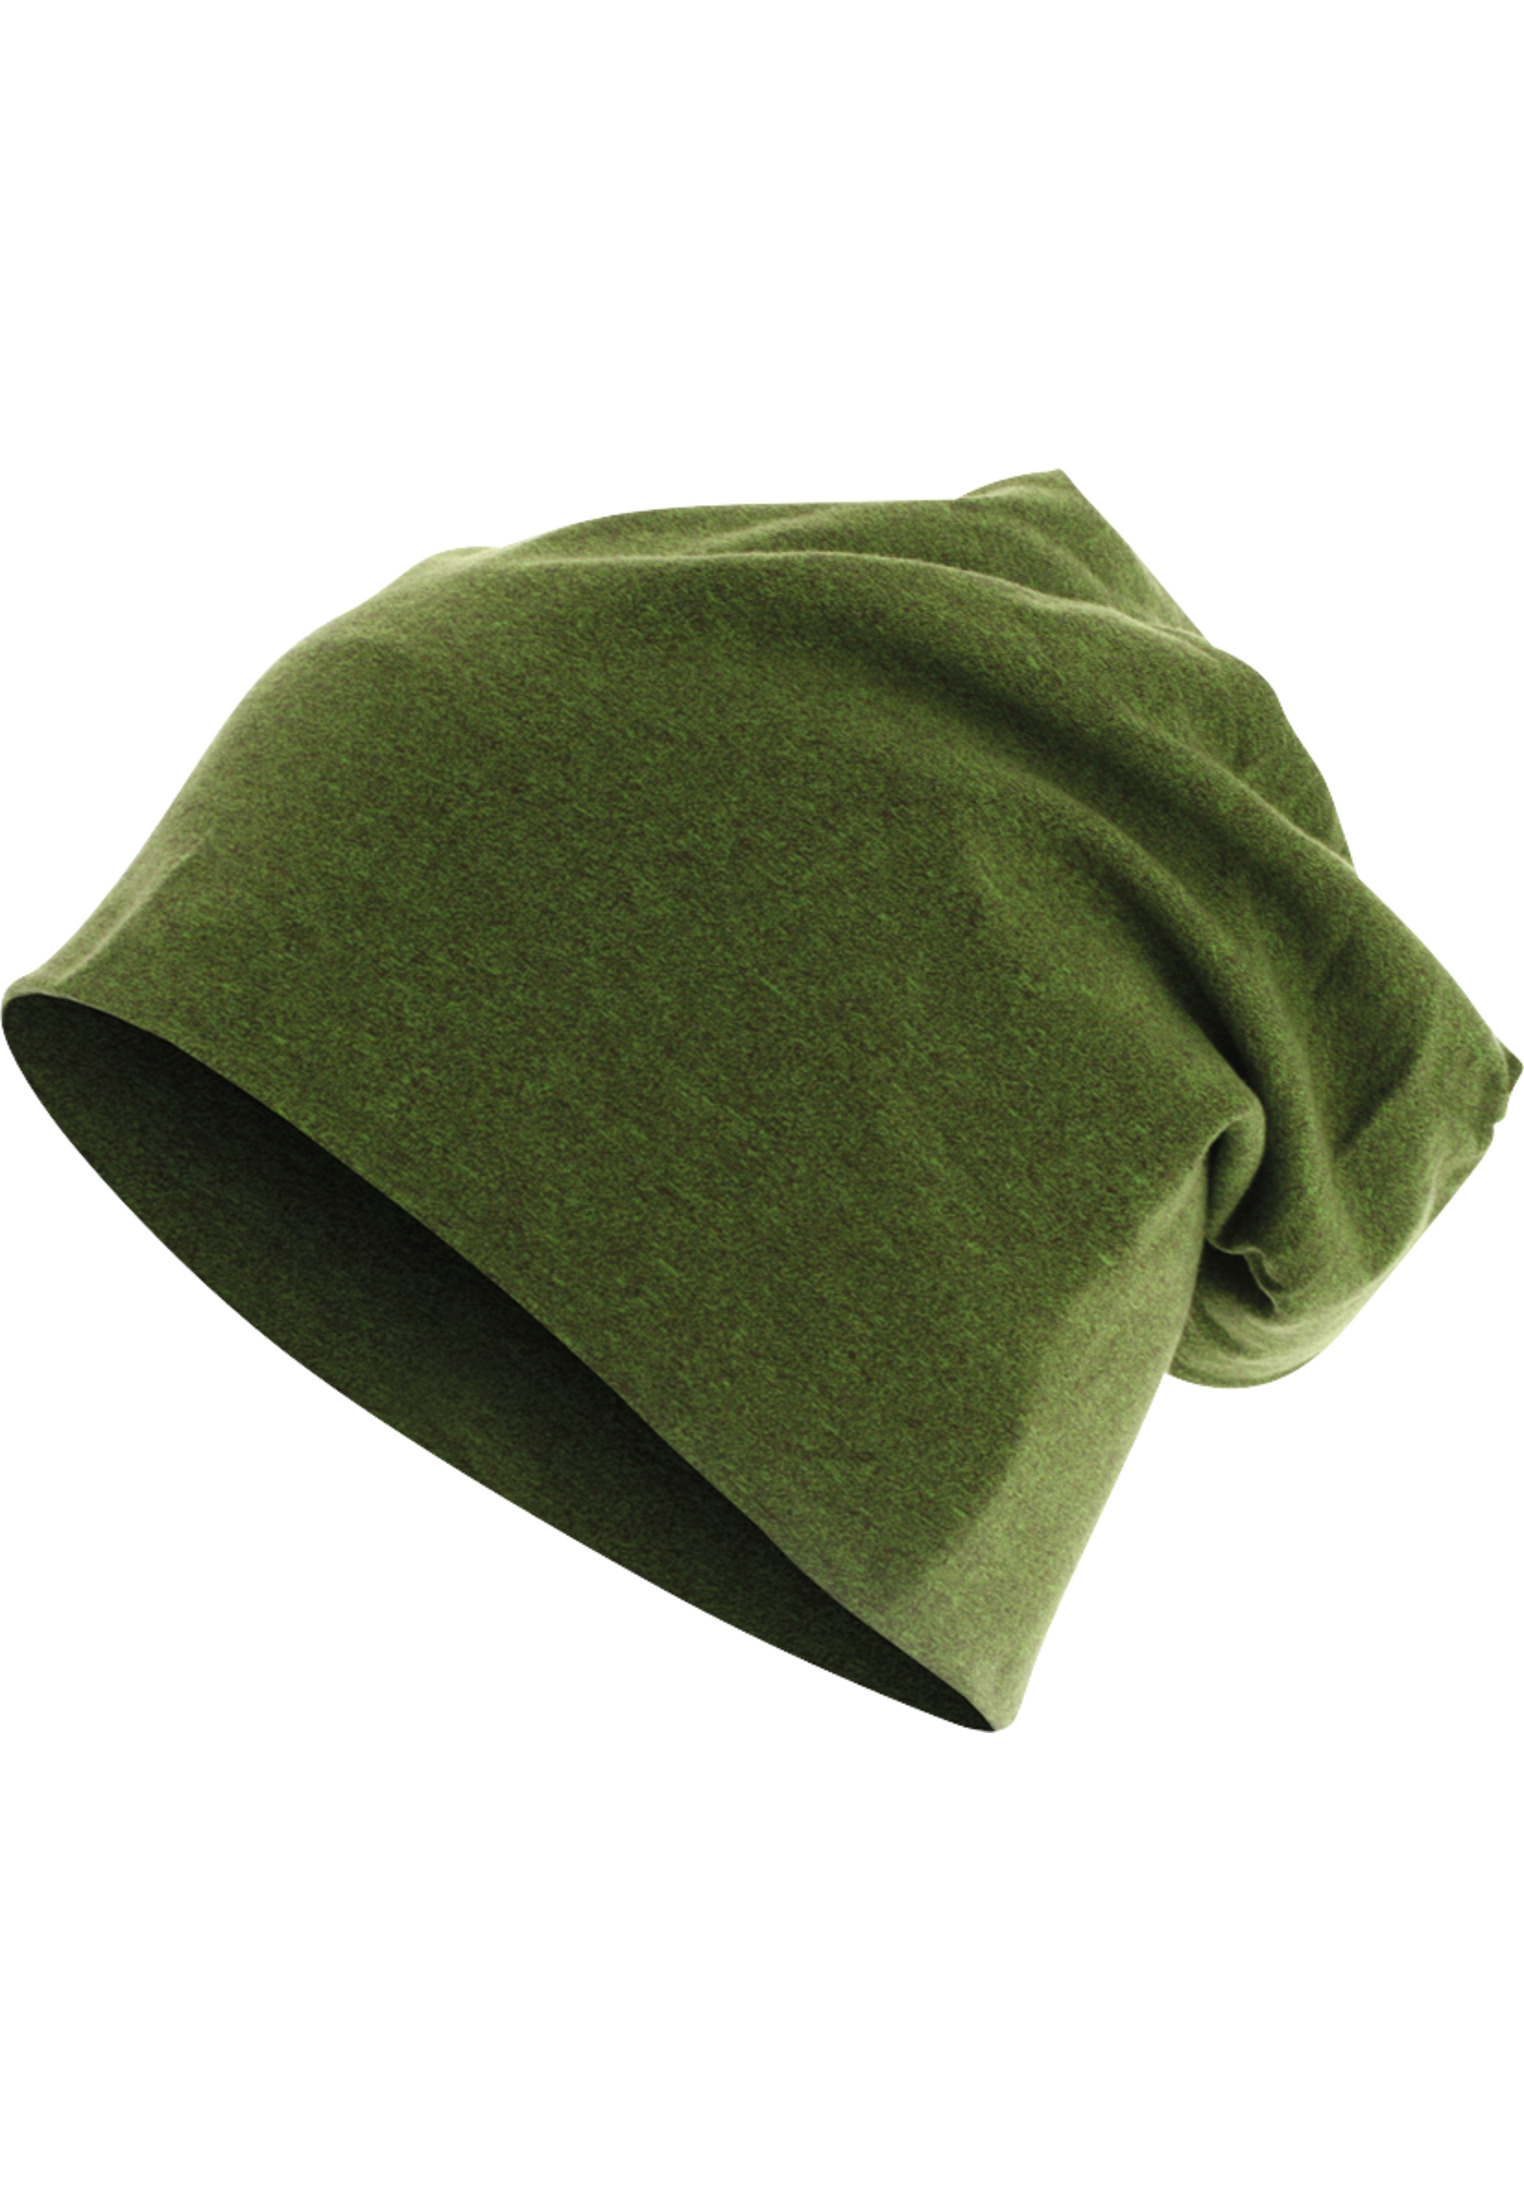 Caps & Beanies Heather Jersey Beanie in Farbe limegreen